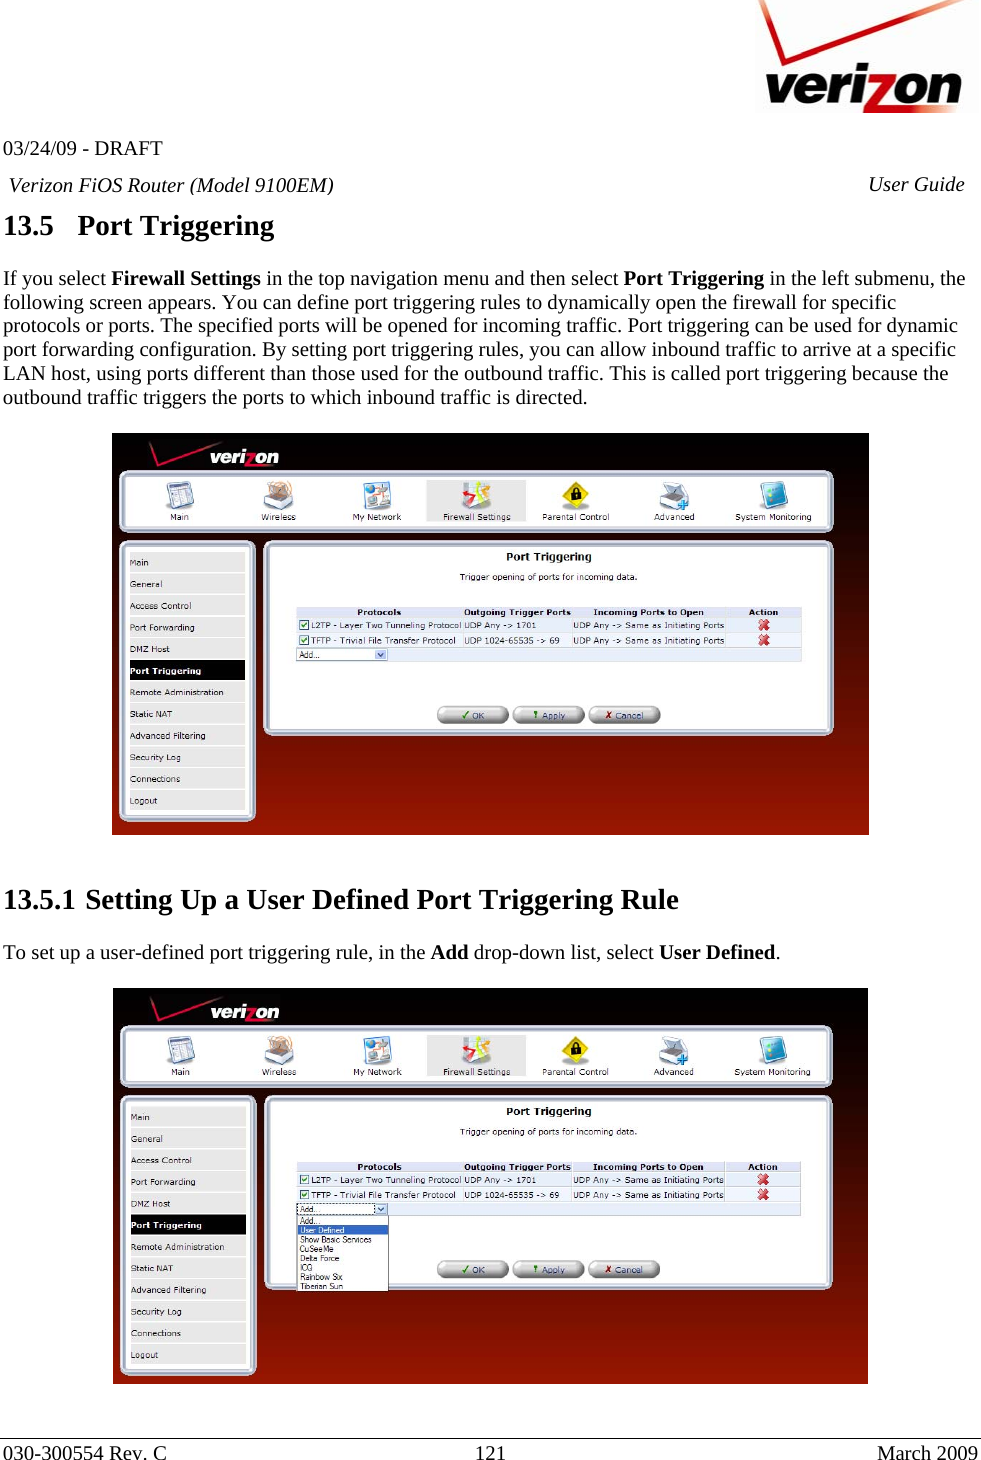   03/24/09 - DRAFT   030-300554 Rev. C  121      March 2009  Verizon FiOS Router (Model 9100EM) User Guide13.5   Port Triggering  If you select Firewall Settings in the top navigation menu and then select Port Triggering in the left submenu, the following screen appears. You can define port triggering rules to dynamically open the firewall for specific protocols or ports. The specified ports will be opened for incoming traffic. Port triggering can be used for dynamic port forwarding configuration. By setting port triggering rules, you can allow inbound traffic to arrive at a specific LAN host, using ports different than those used for the outbound traffic. This is called port triggering because the outbound traffic triggers the ports to which inbound traffic is directed.     13.5.1  Setting Up a User Defined Port Triggering Rule  To set up a user-defined port triggering rule, in the Add drop-down list, select User Defined.     